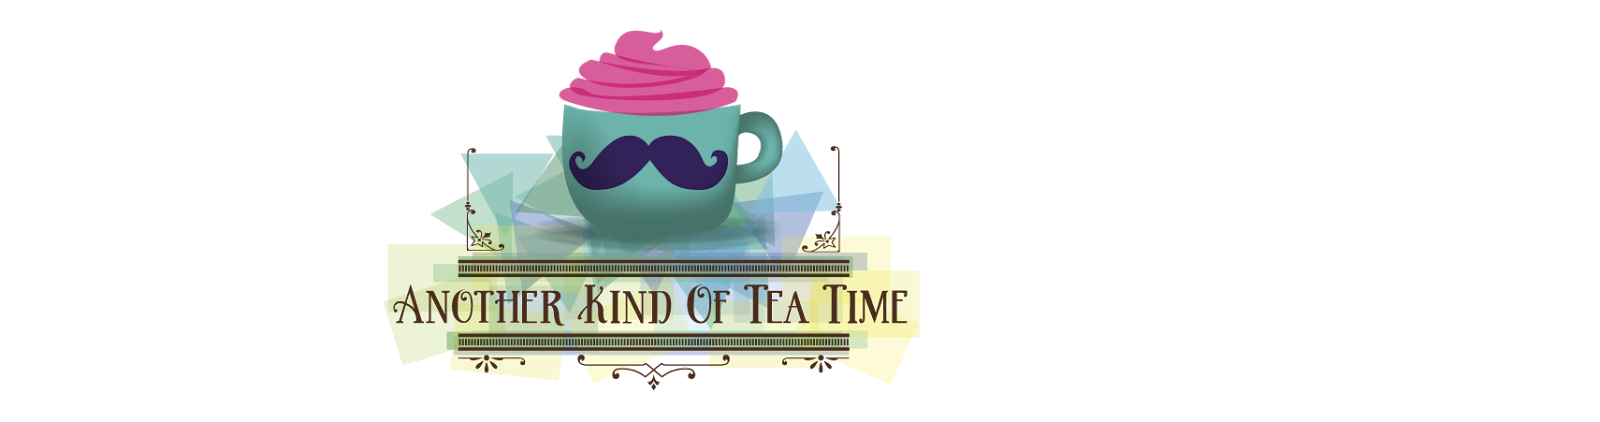 ...Another kind of tea time...